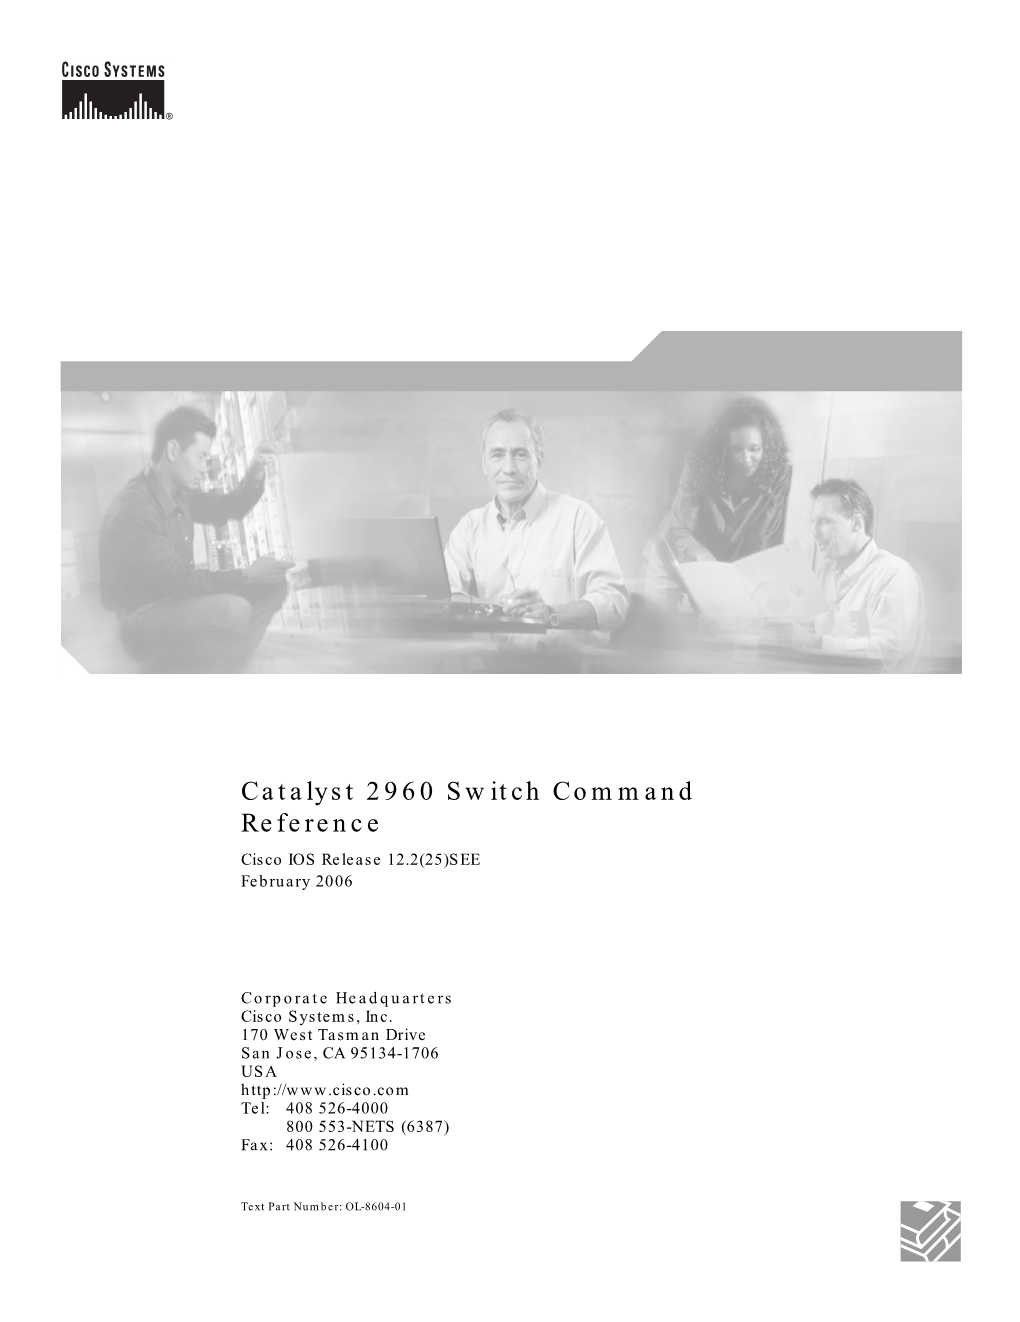 Catalyst 2960 Switch Command Reference (Full Book in PDF Format)